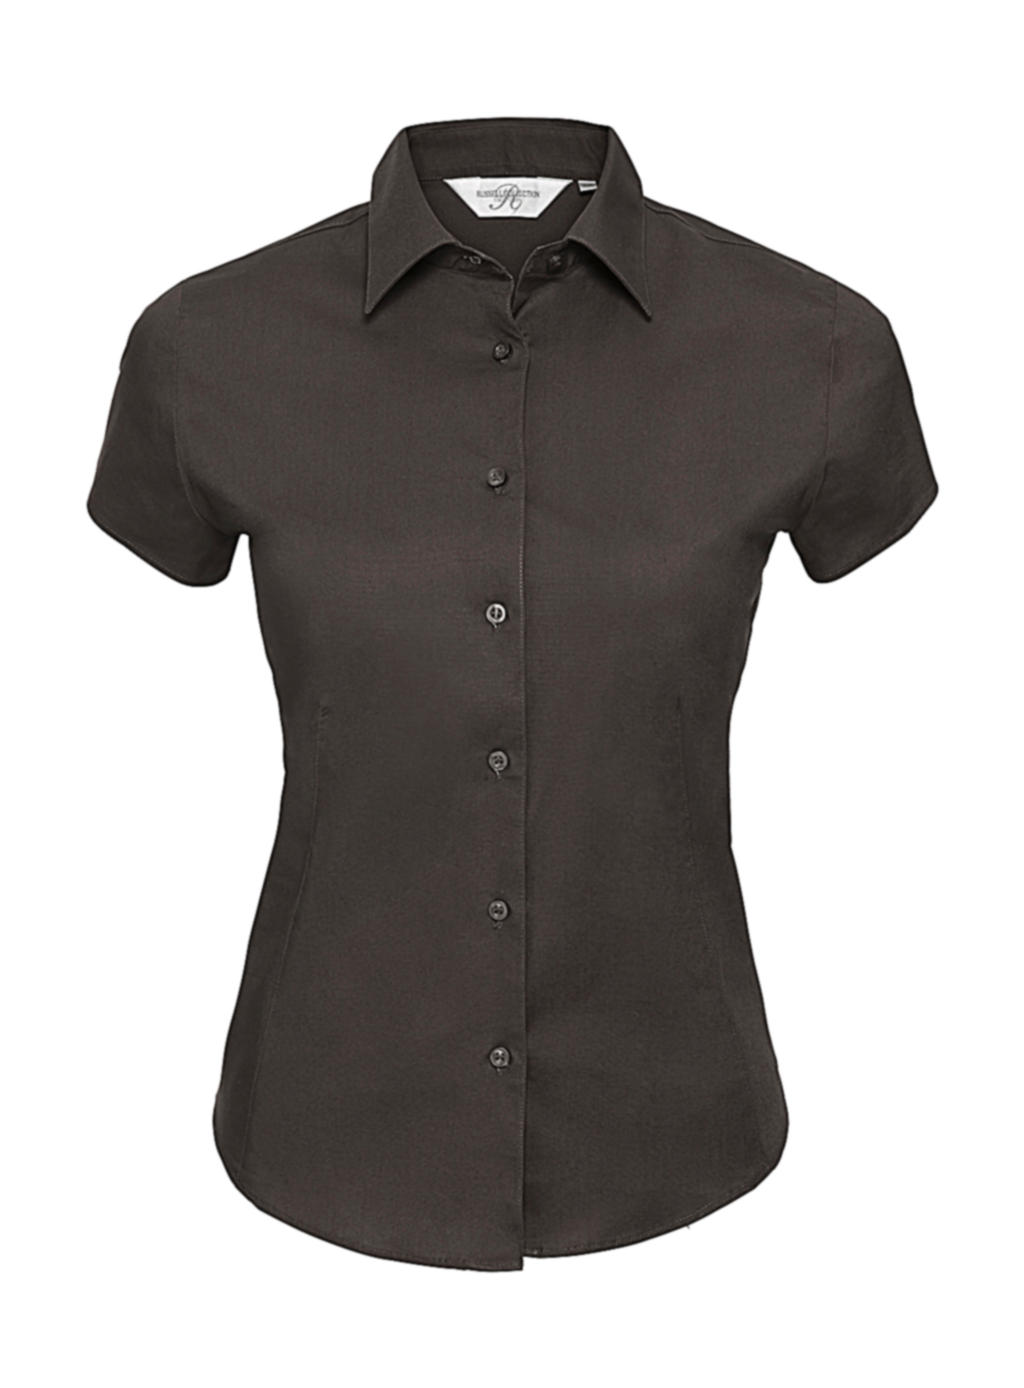  Ladies Easy Care Fitted Shirt in Farbe Chocolate